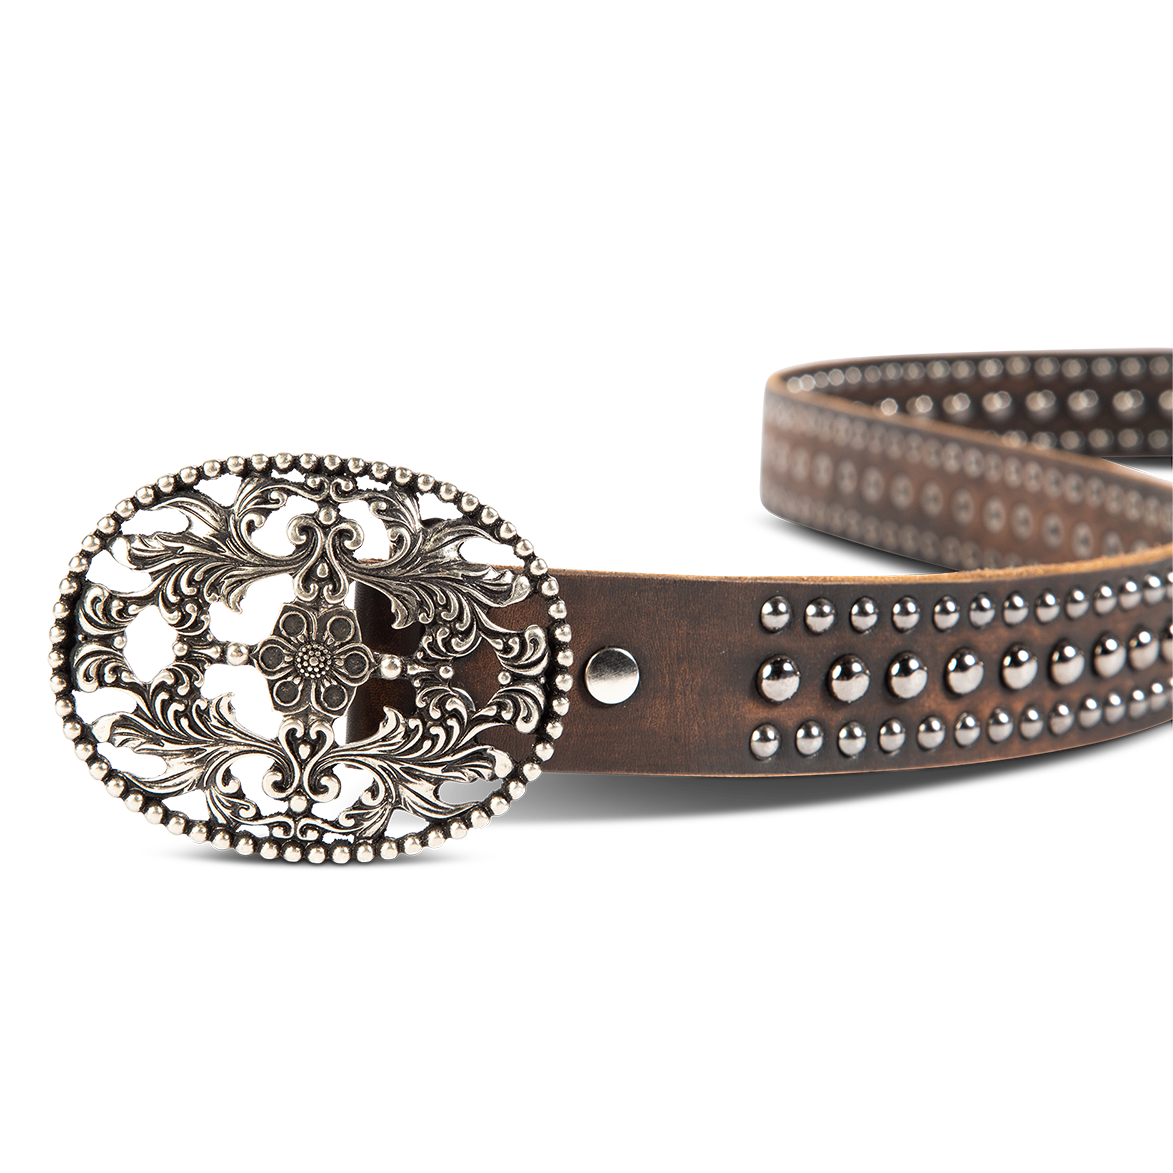 Iron black distressed front view featuring large cut out metal buckle closure and embroidered detailing on FREEBIRD full grain leather belt